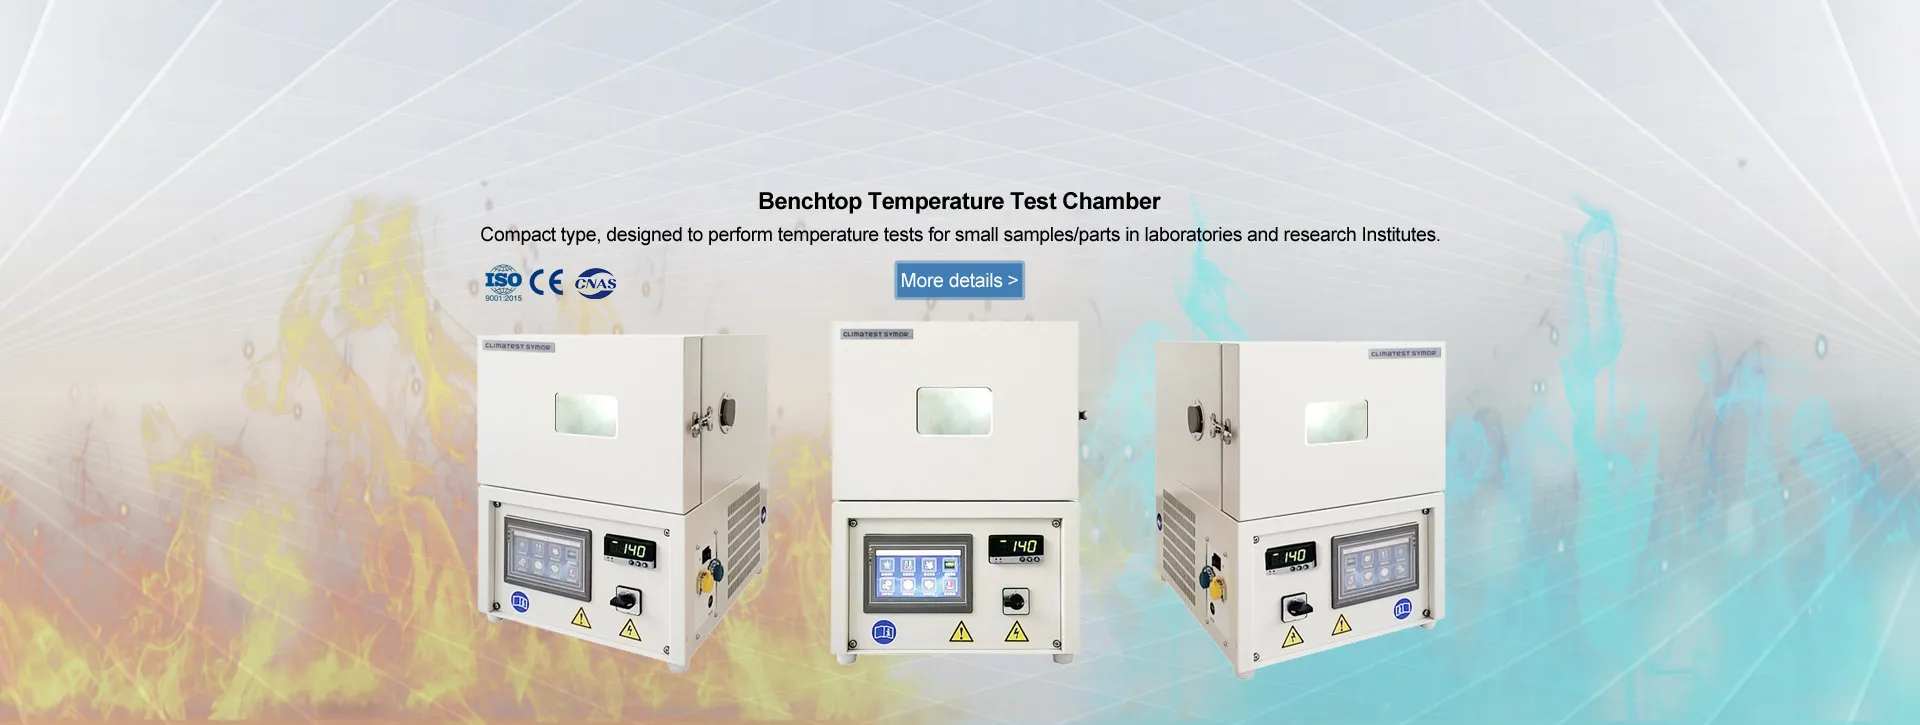 Benchtop Temperature Test Chamber Factory